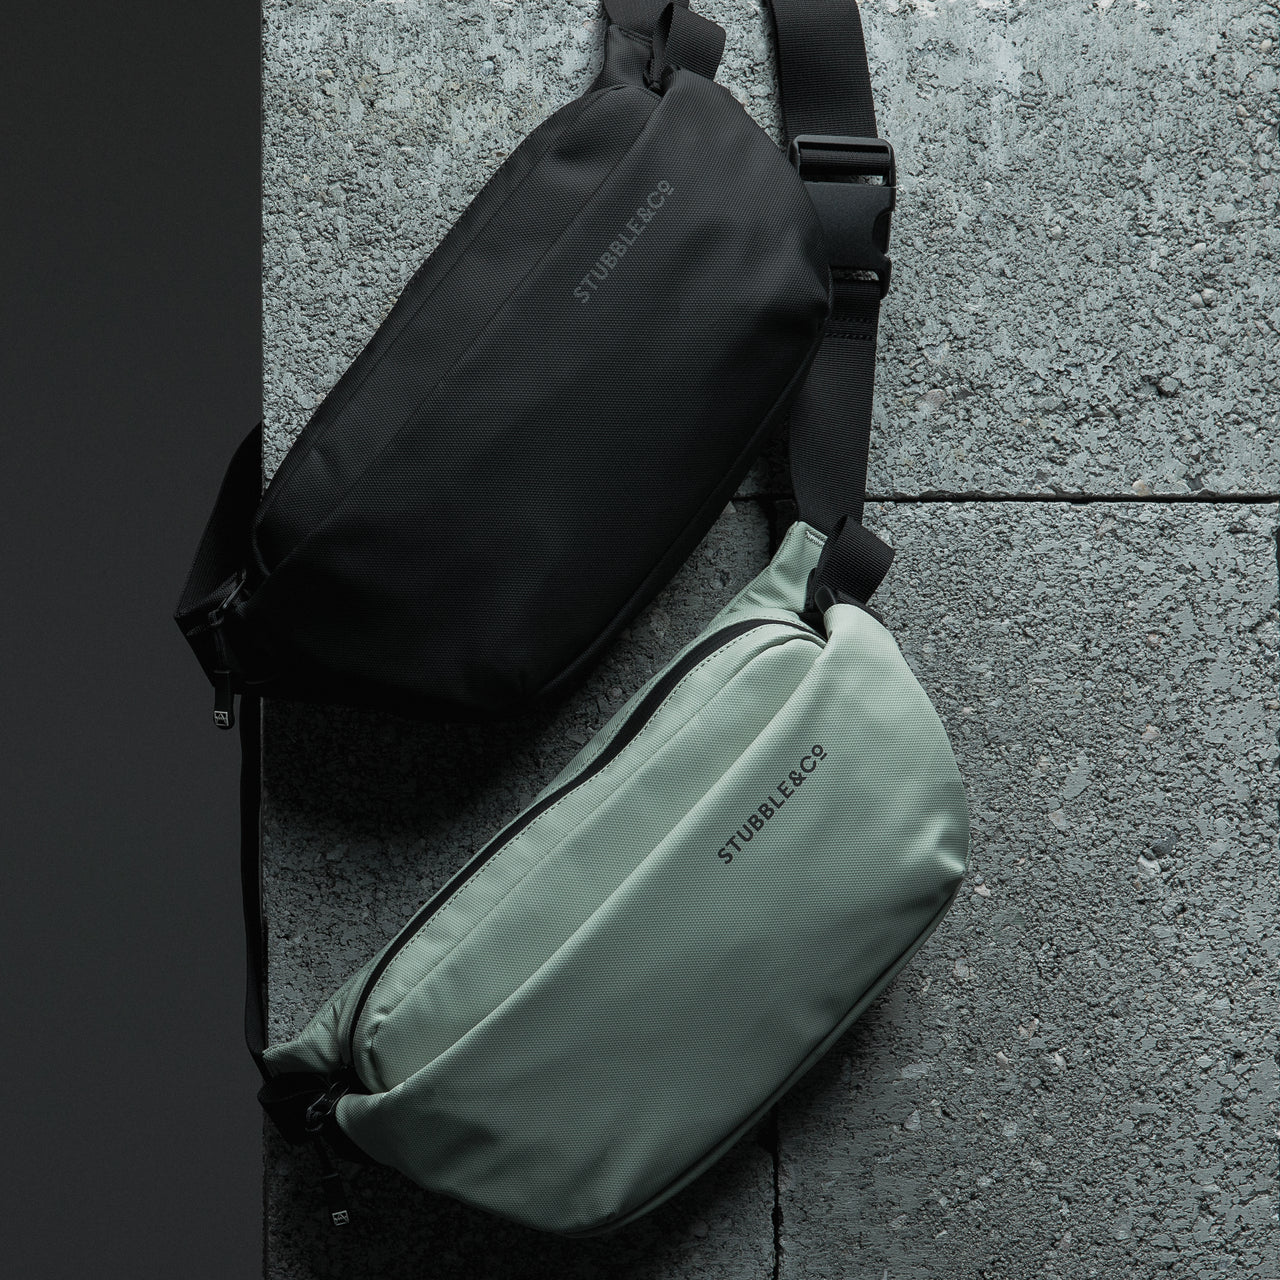 A Matcha green and all black crossbody hanging on a concrete block